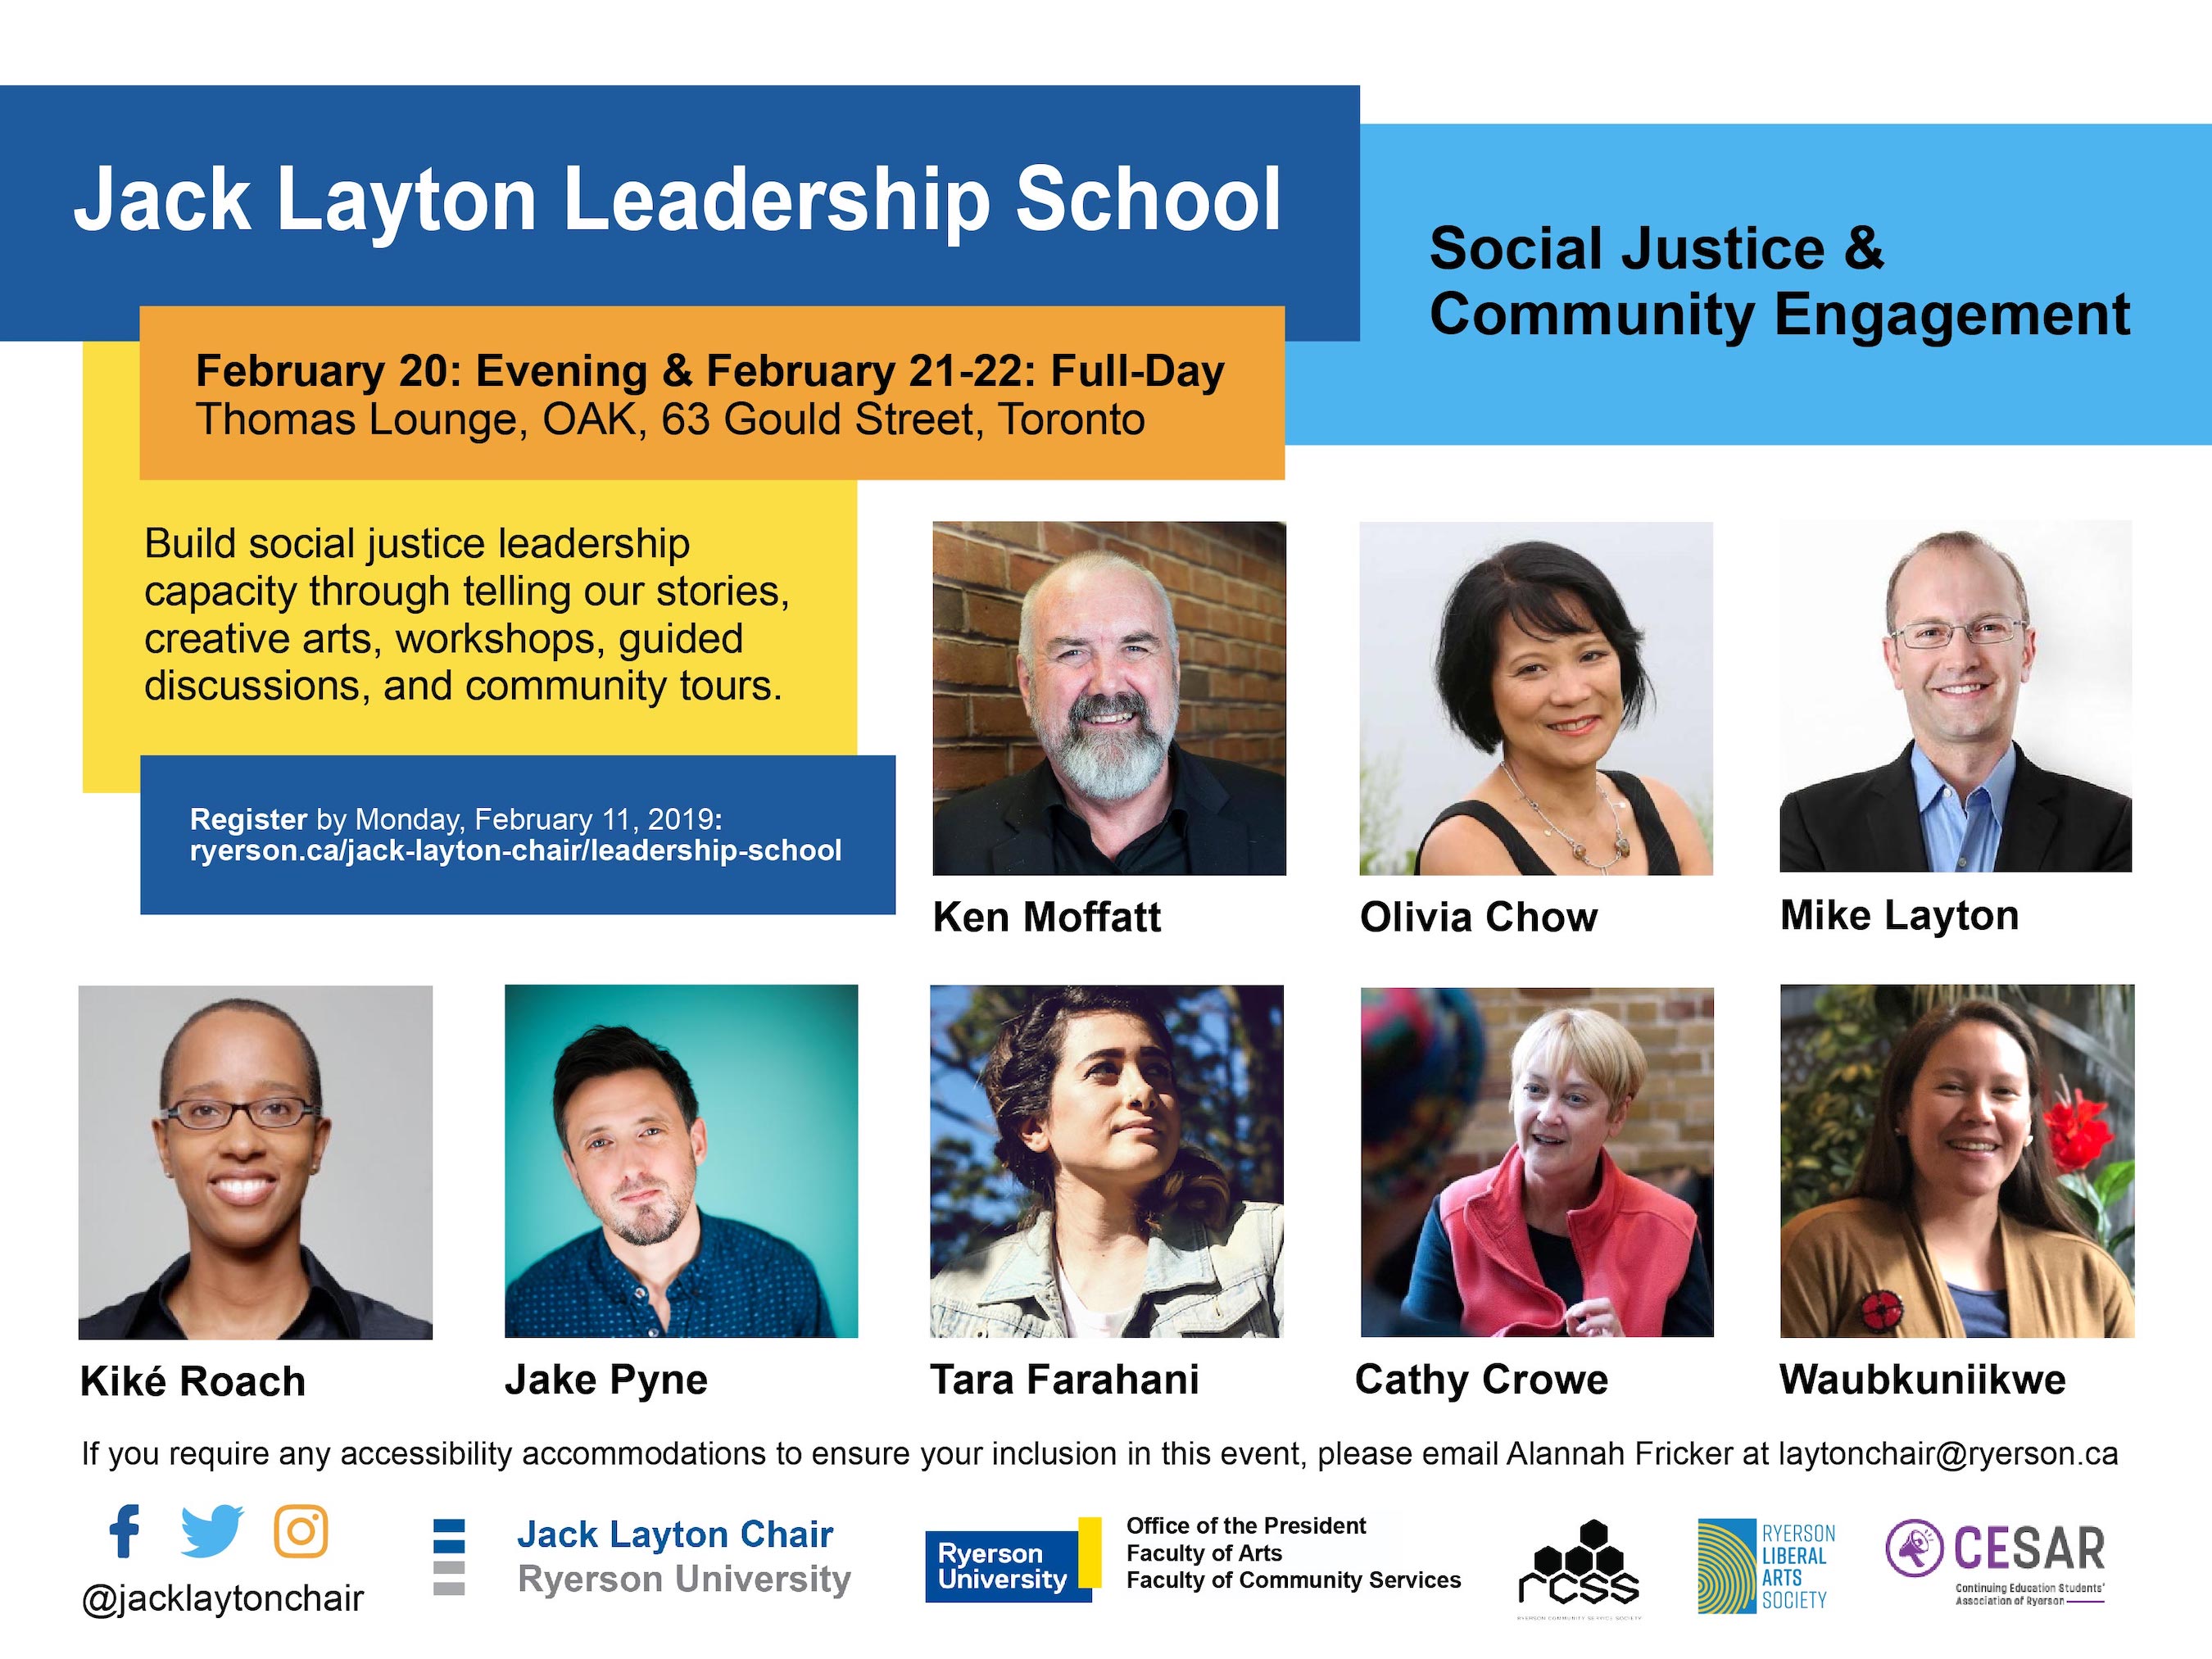 Join us for an evening introduction and two-day workshop where we engage with social justice issues, hear from community leaders, build leadership capacity, and learn how to tell our story.